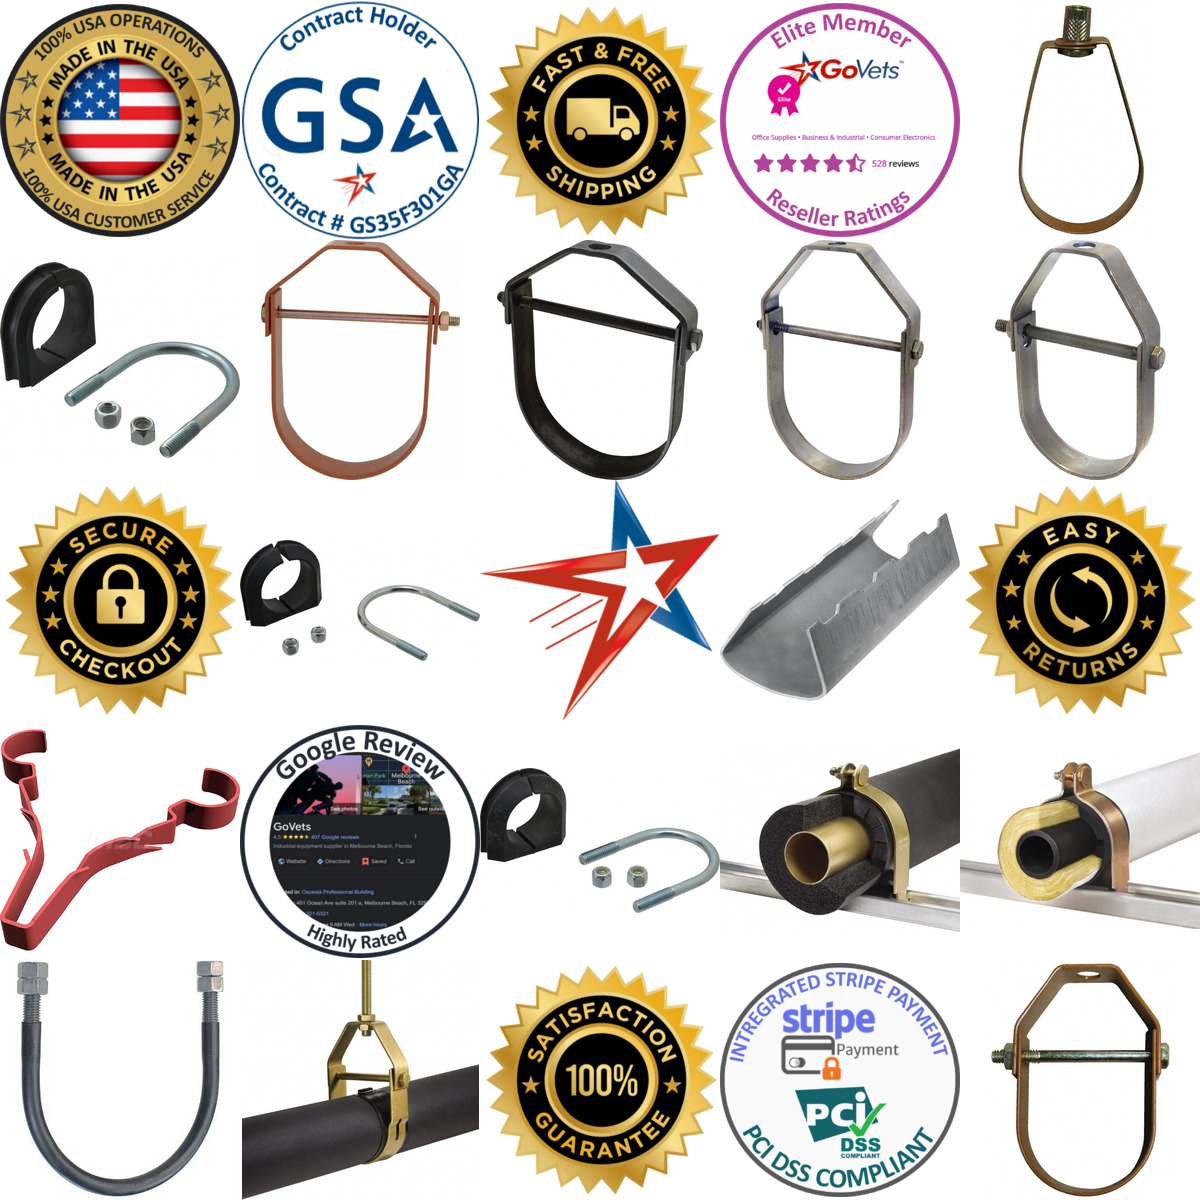 A selection of Pipe and Cable Hangers products on GoVets